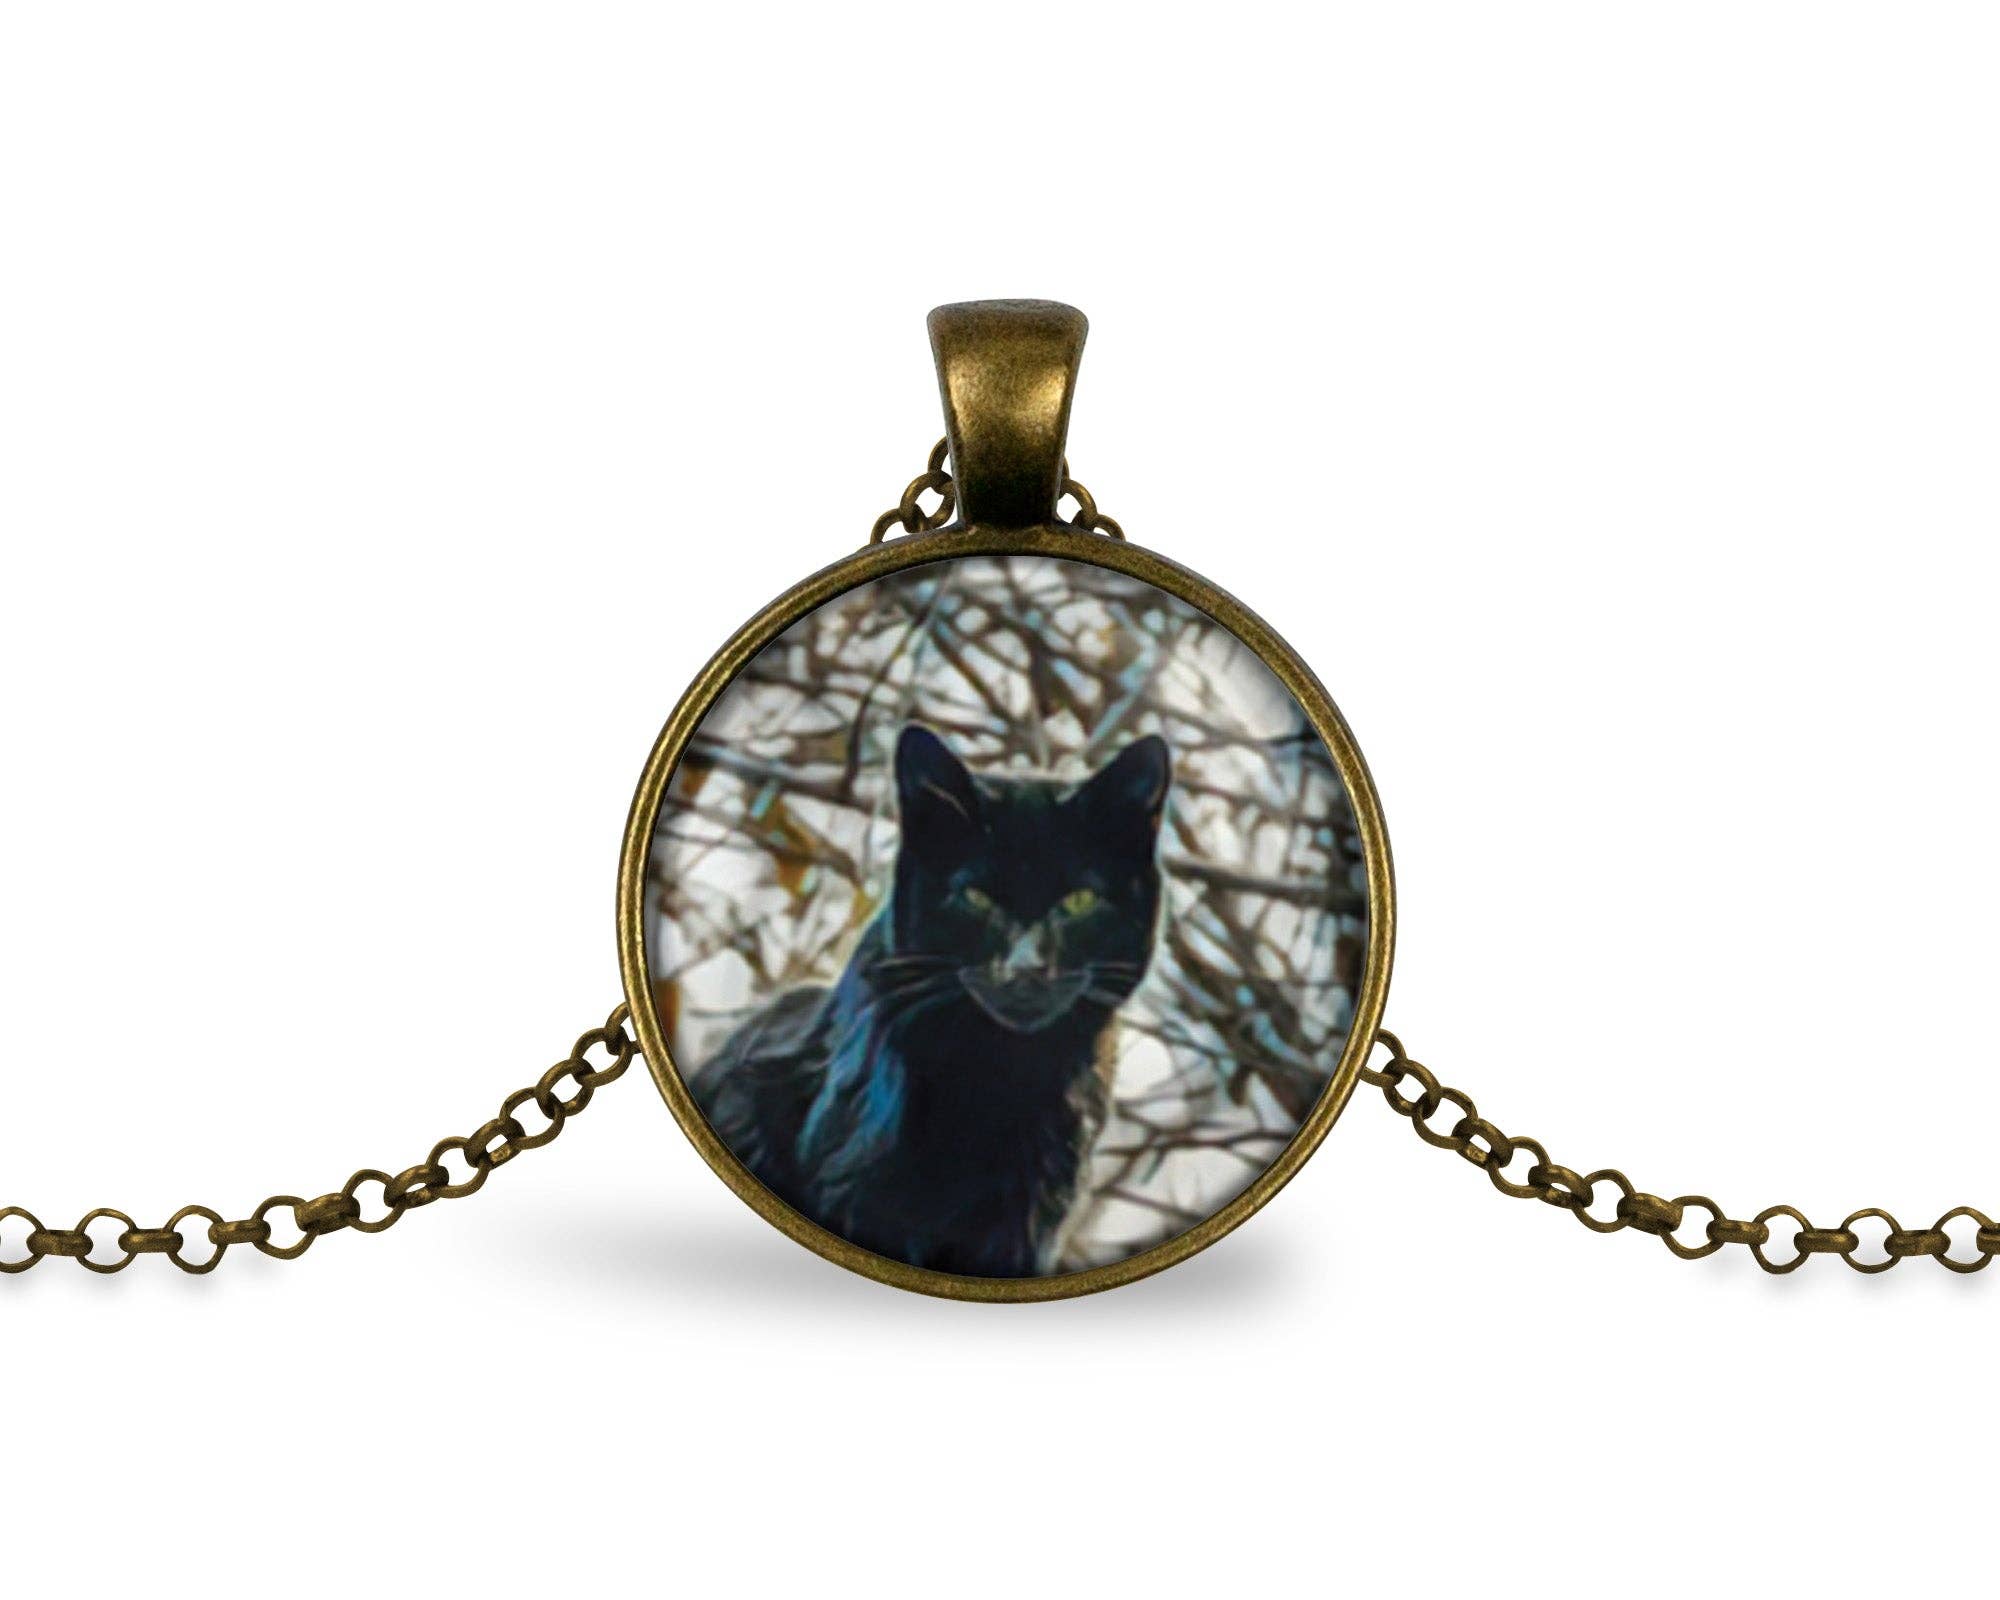 Niche-Finds Black Cat Stainless Steel Black Kitty Necklace and Pendant 